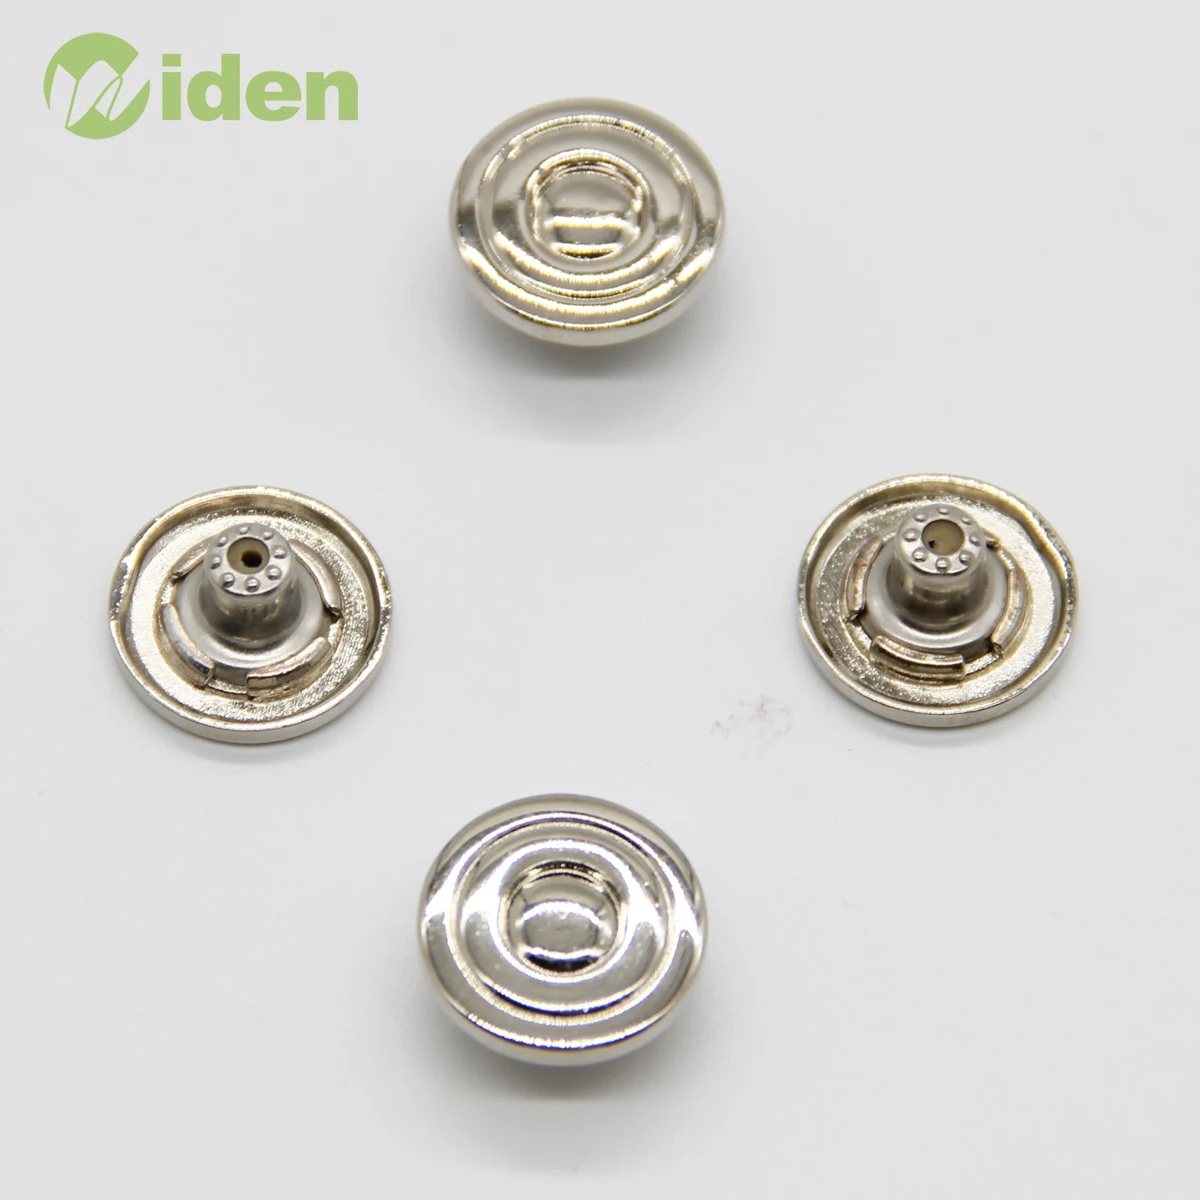 High Quality Vintage Buttons Metal Jeans Button For Denim Clothing